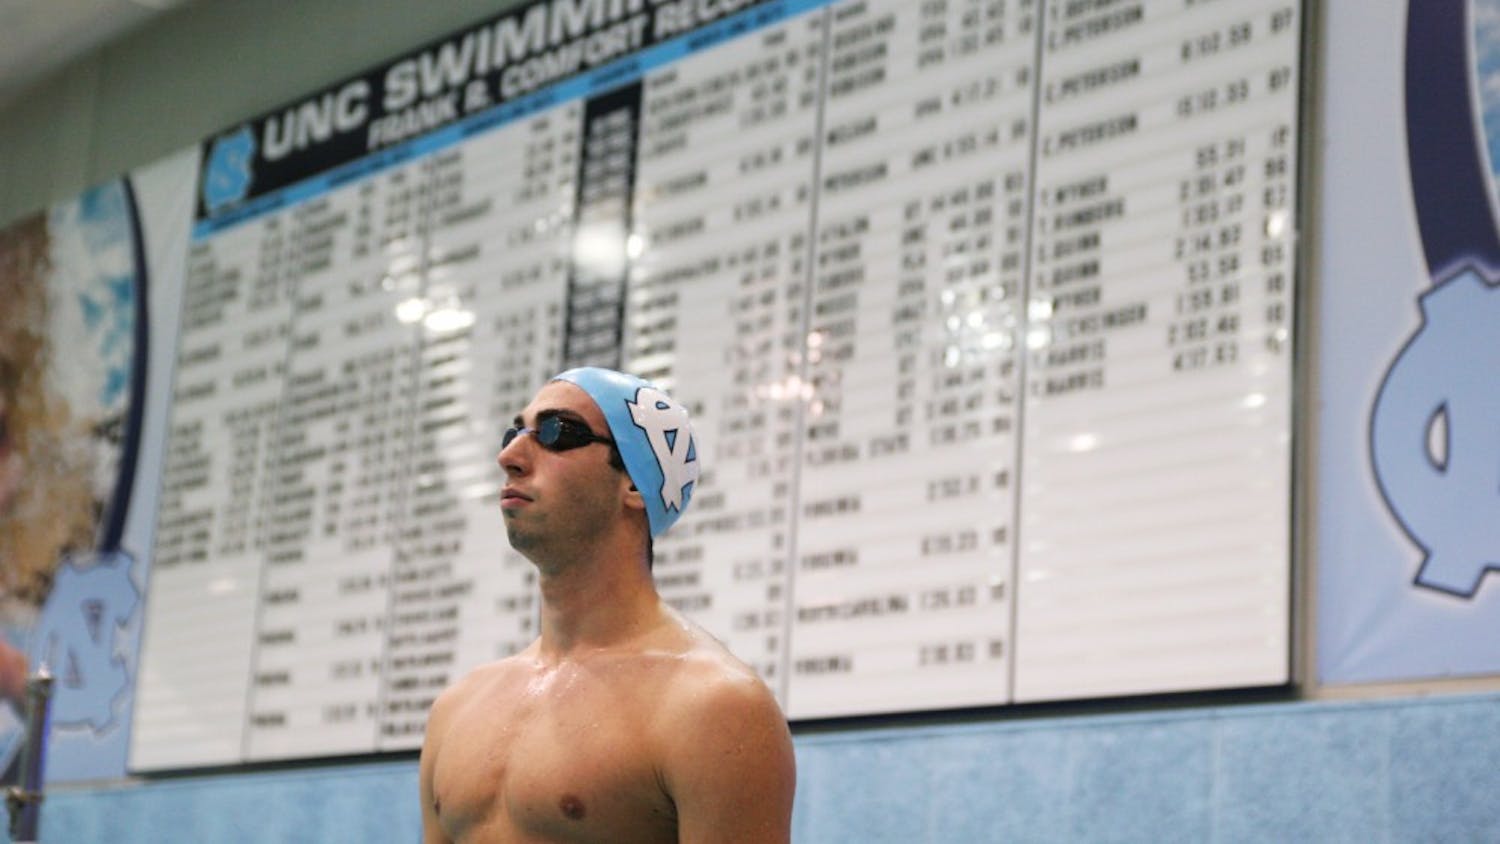 Colin Bridier is gunning for the North Carolina record books while he still has time in Chapel Hill. The French foreign exchange student is grappling with the decision to return to UNC next year. He’s already broken one teammate’s 100-yard breaststroke record despite sitting out the first two meets due to compliance and eligibility issues with the NCAA.